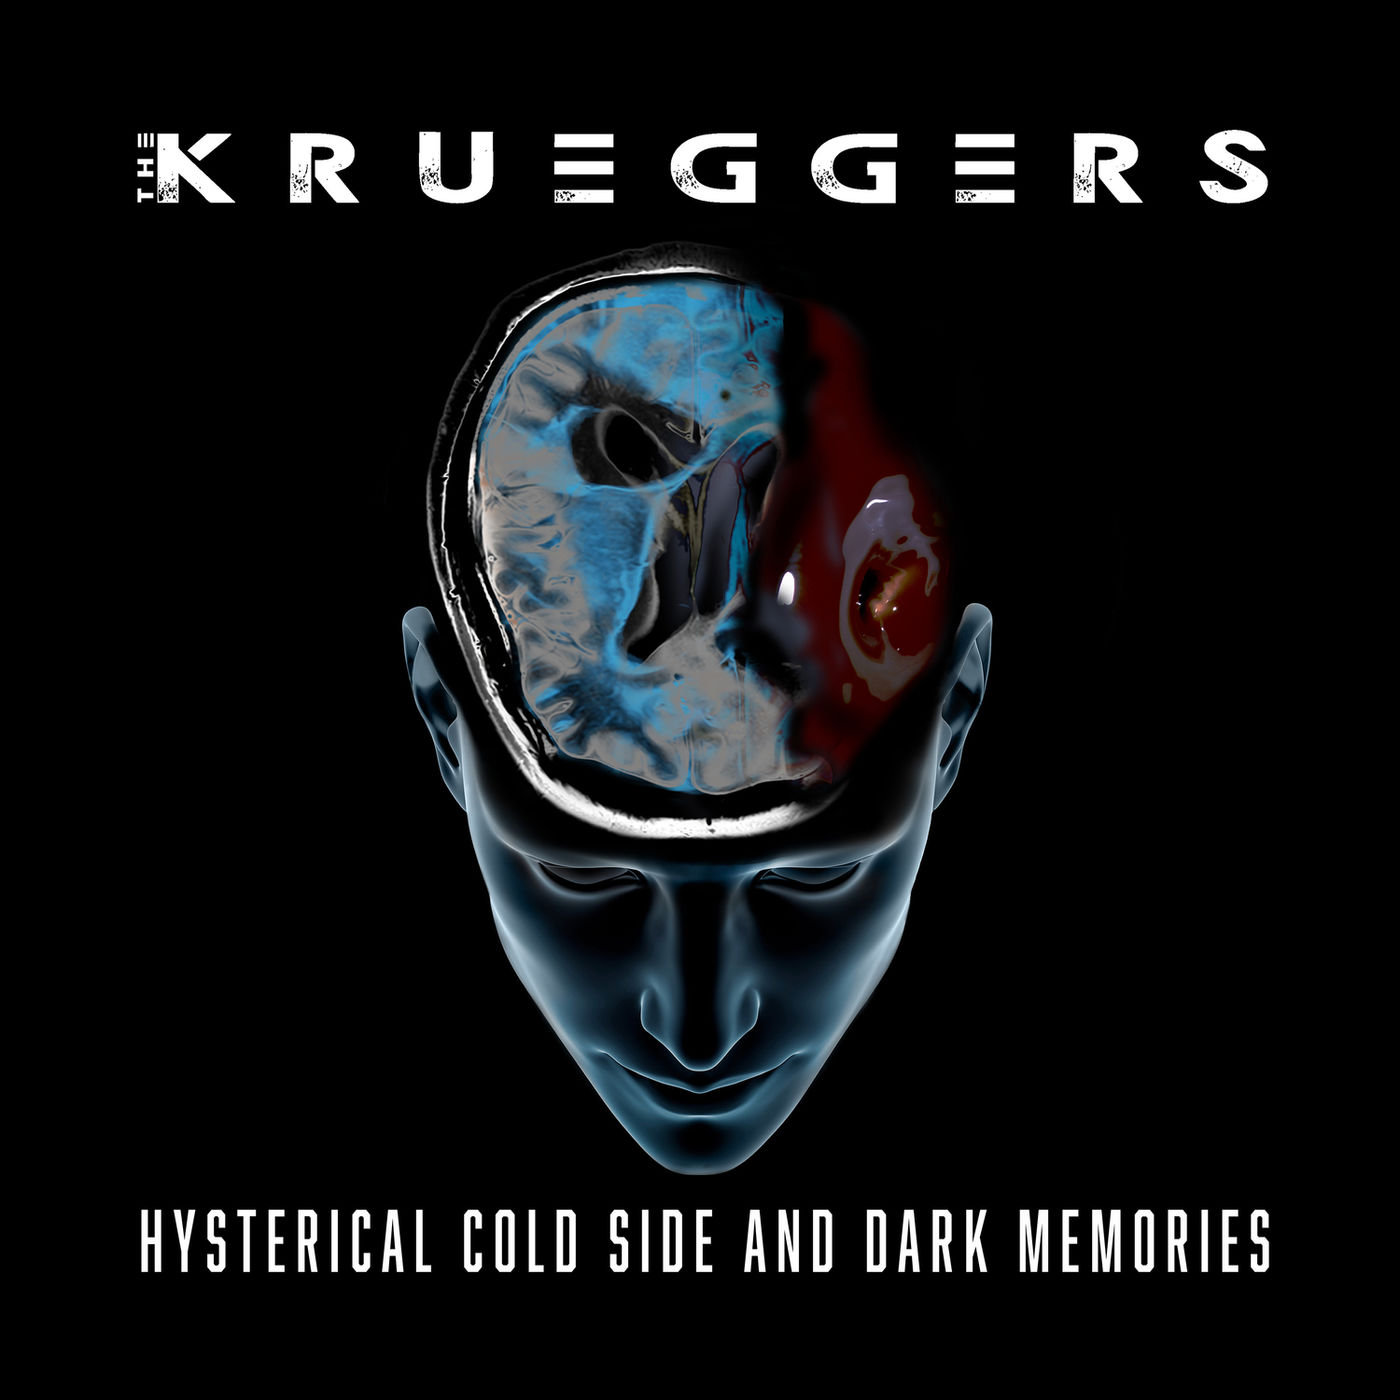 The Krueggers 2020 - Hysterical Cold Side and Dark Memories